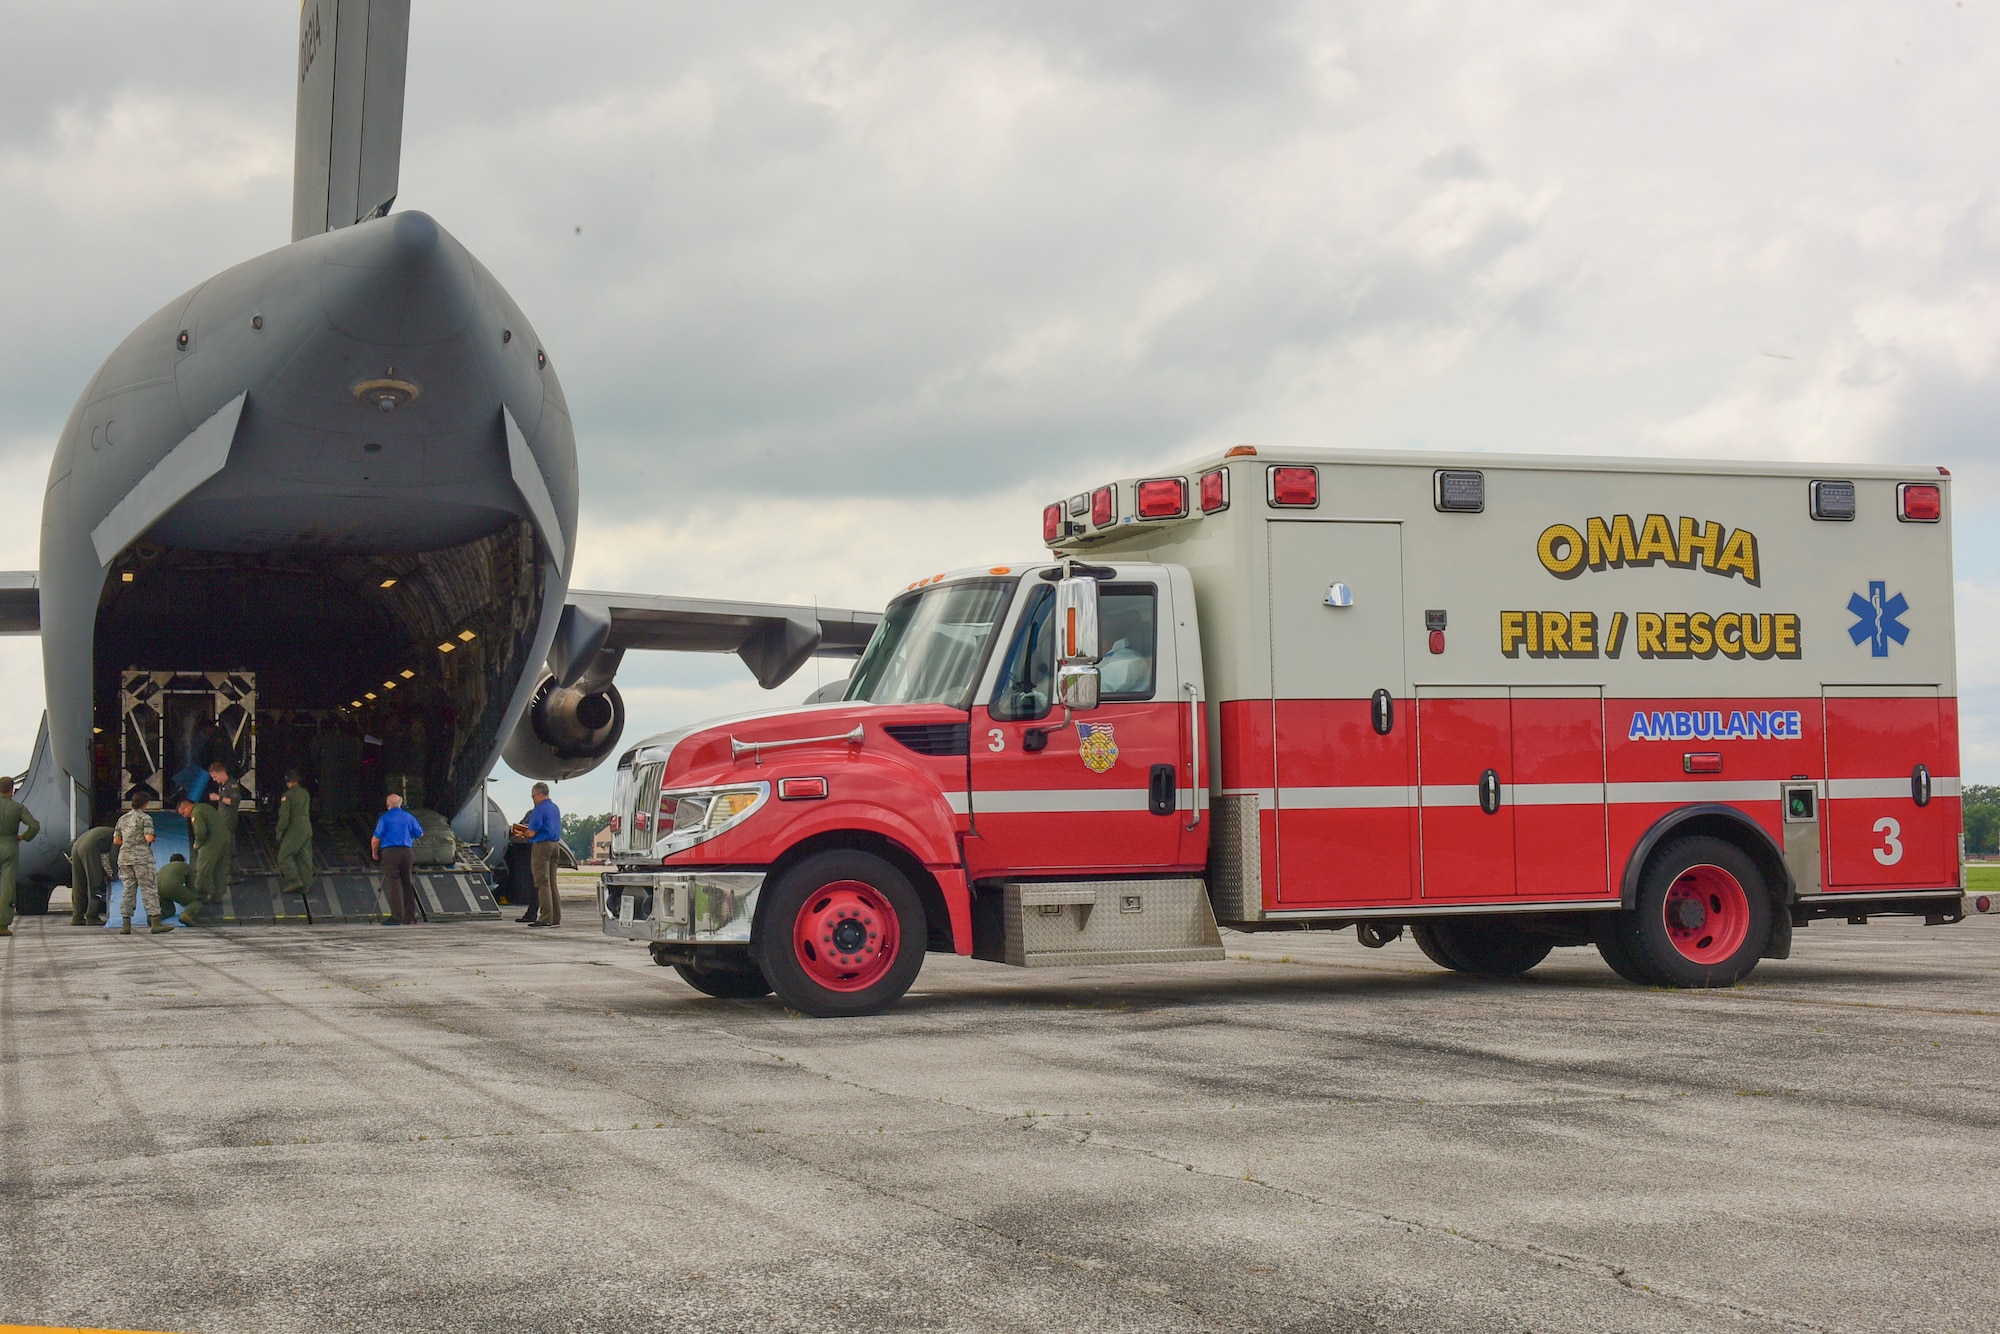 Airmen from the 628th and 375th Aeromedical Evacuation Squadrons prepare to transfer simulated patients from a Transportation Isolation System on a C-17 Globemaster III to an ambulance during an exercise July 18, 2018 at Offut Air Force Base, Neb. The TIS is an enclosure the Department of Defense can use to safely transport patients with highly contagious diseases.